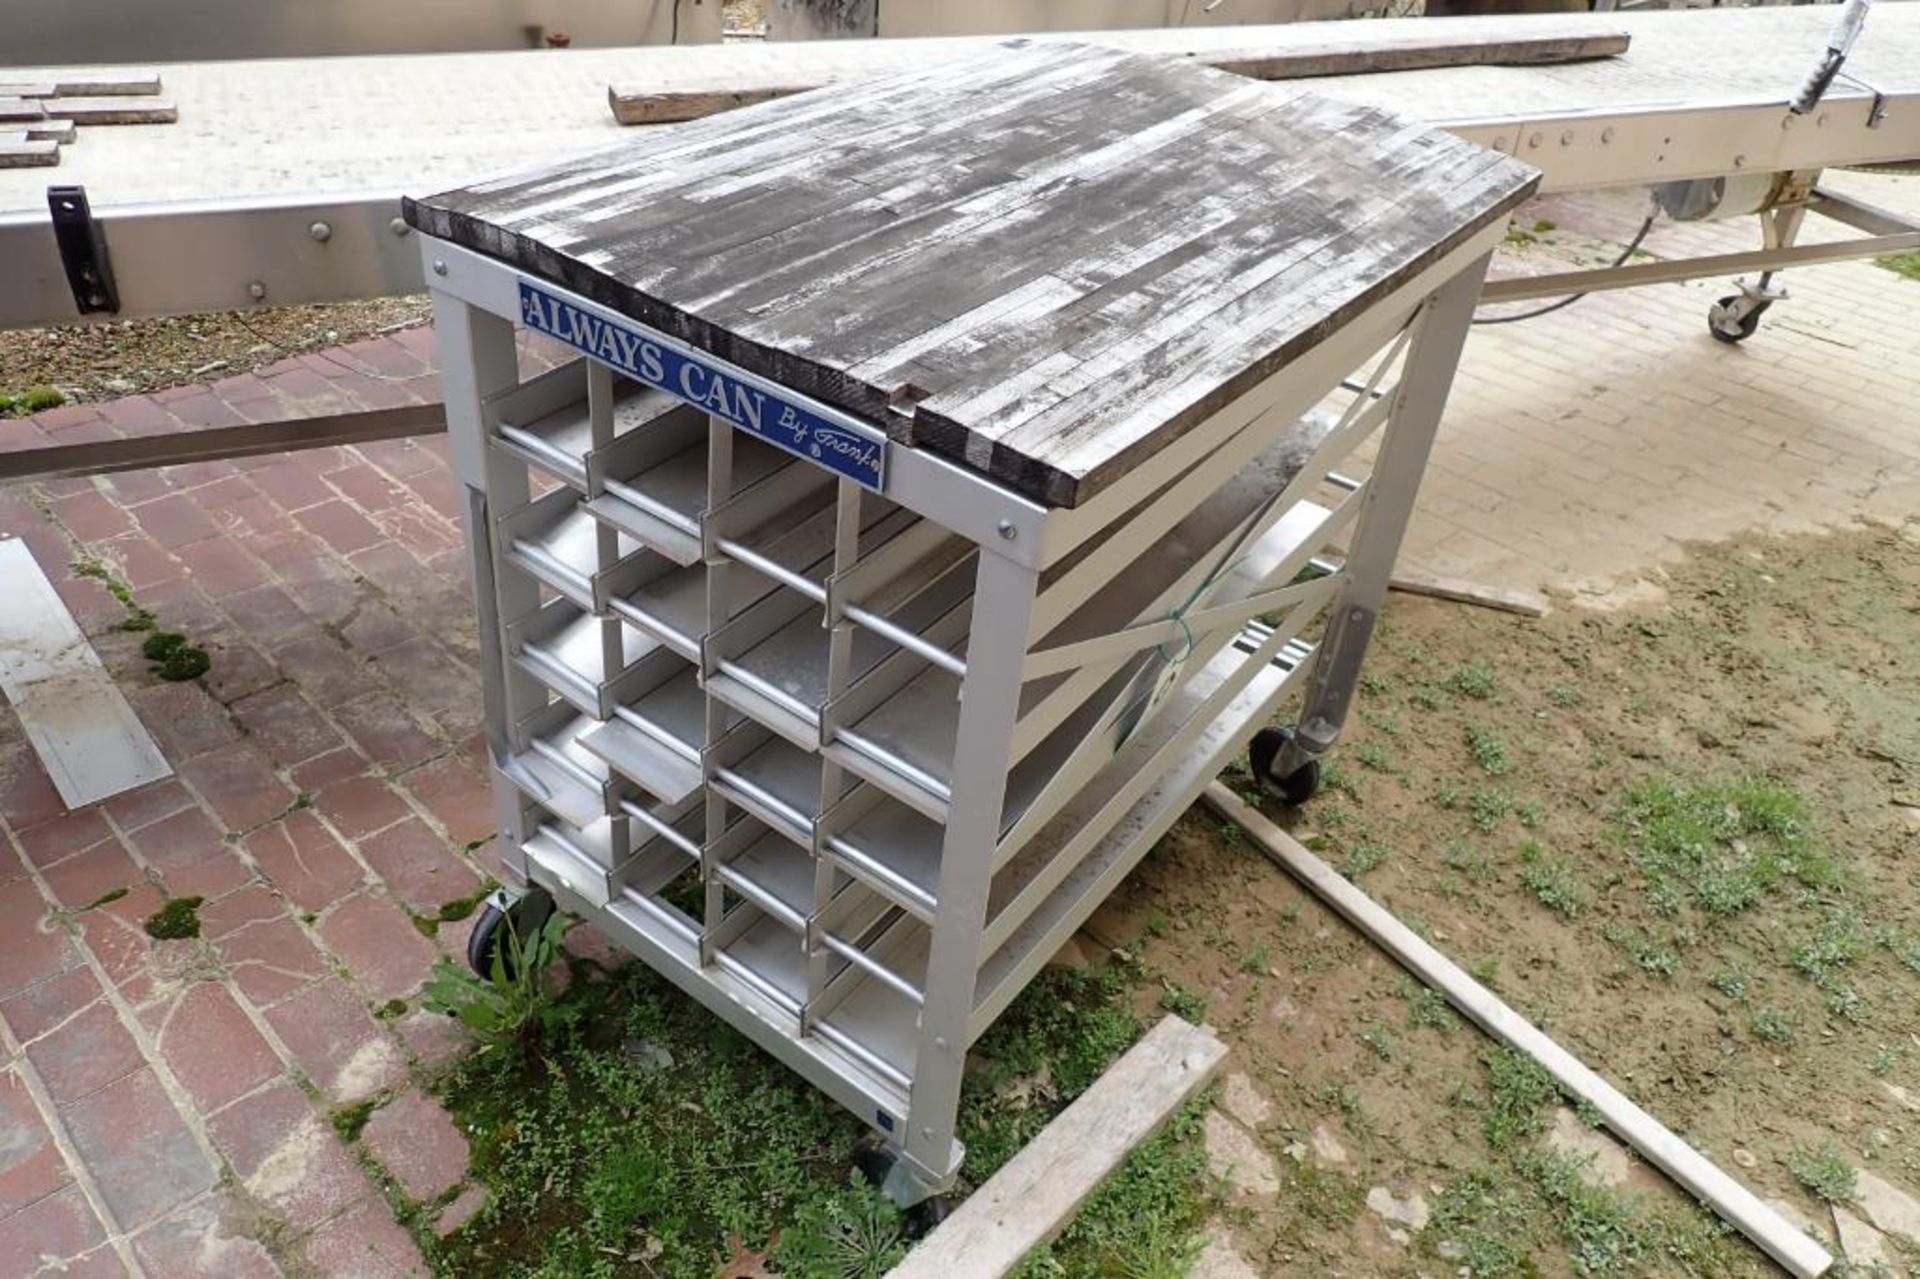 Always can, aluminum can storage cart. {Located in Dixon, IL}